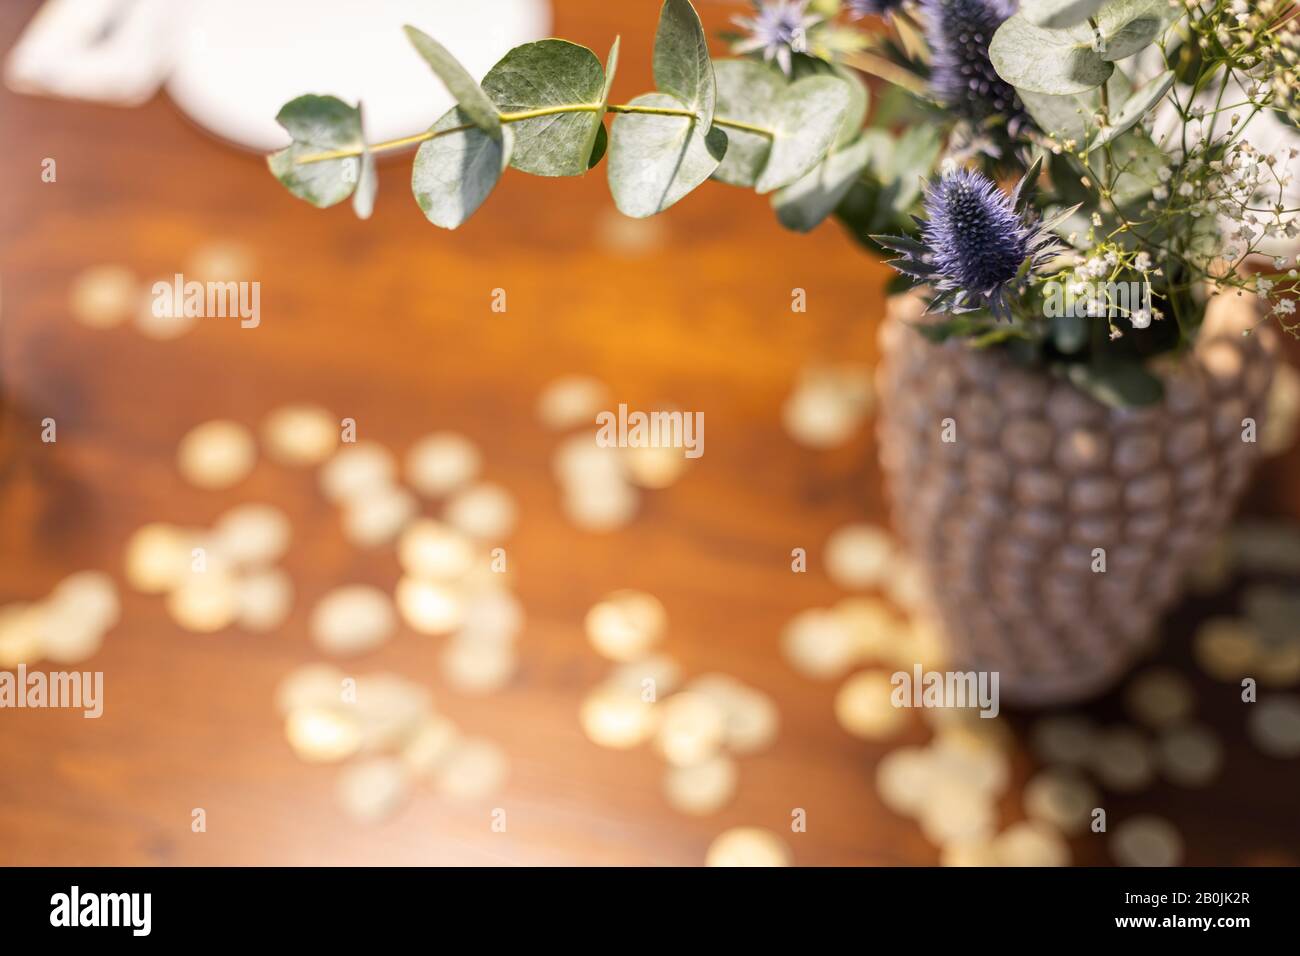 Vase with bouquet of flowers on a table with golden confetti. Stock Photo